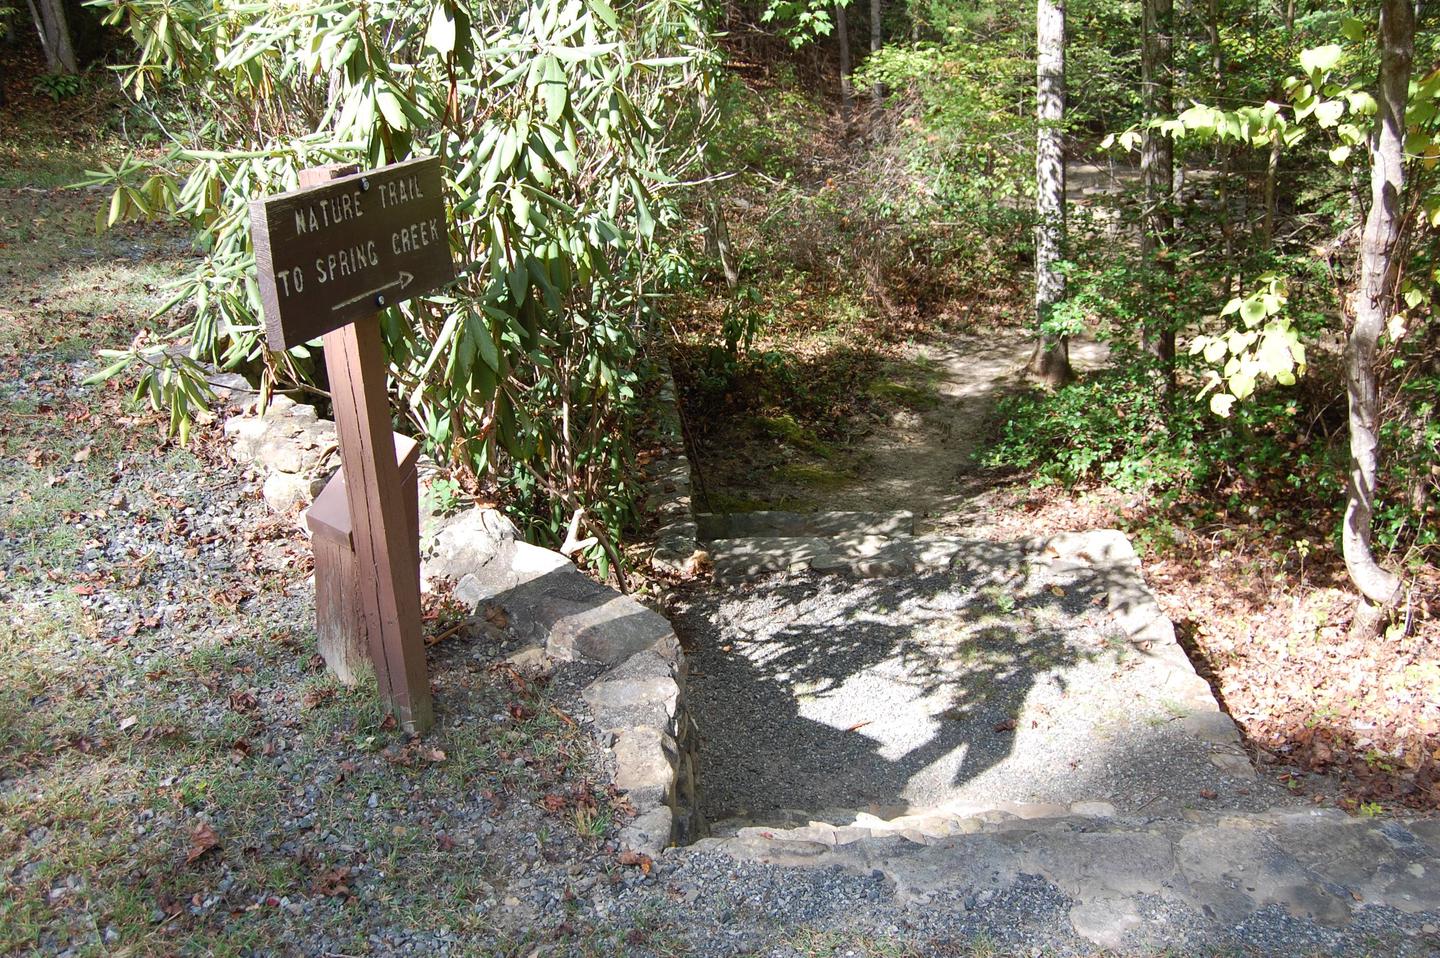 Nature Trail Rocky Bluff features three trailheads, including the Spring Creek Nature Trail. 